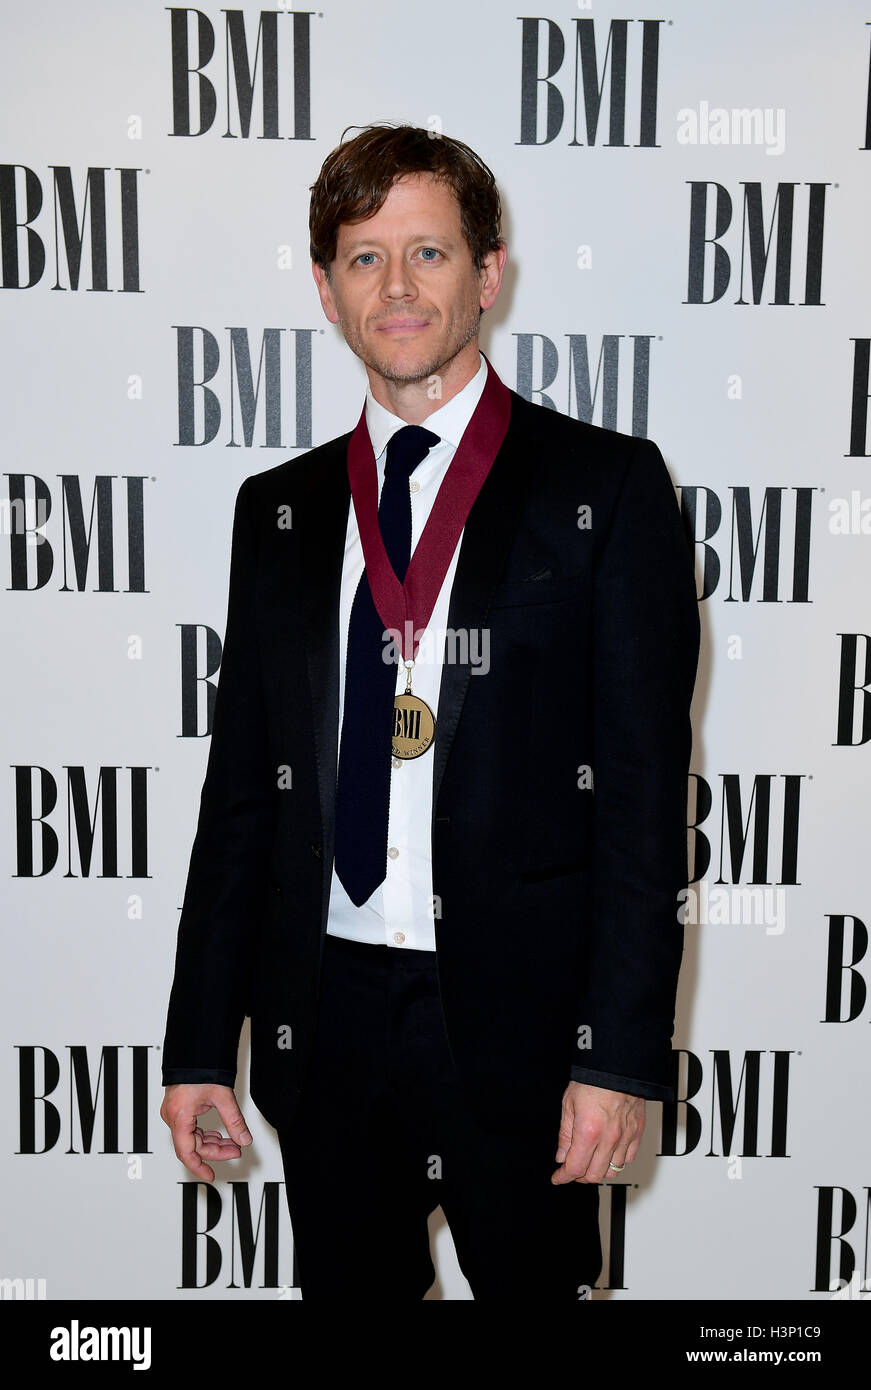 Iain Archer attending the BMI London Awards at the Dorchester Hotel, London. PRESS ASSOCIATION Photo. Picture date: Monday 10th October, 2016. Photo credit should read: Ian West/PA Wire. Stock Photo